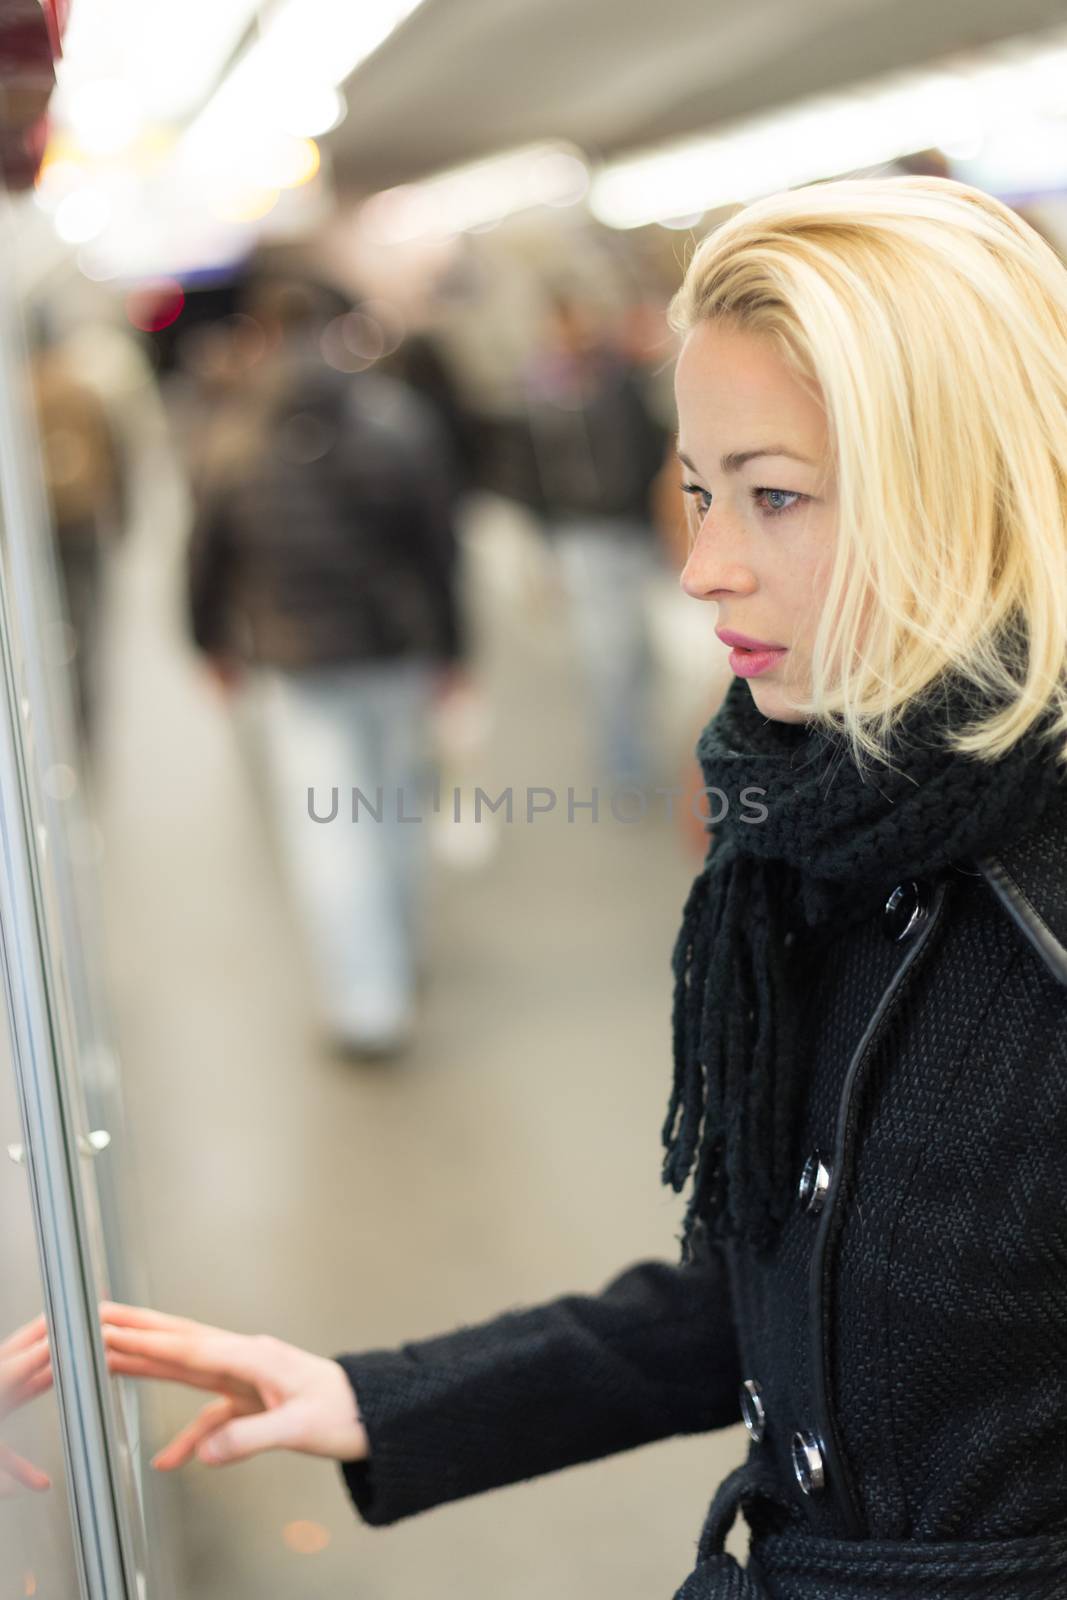 Lady buying ticket for public transport. by kasto